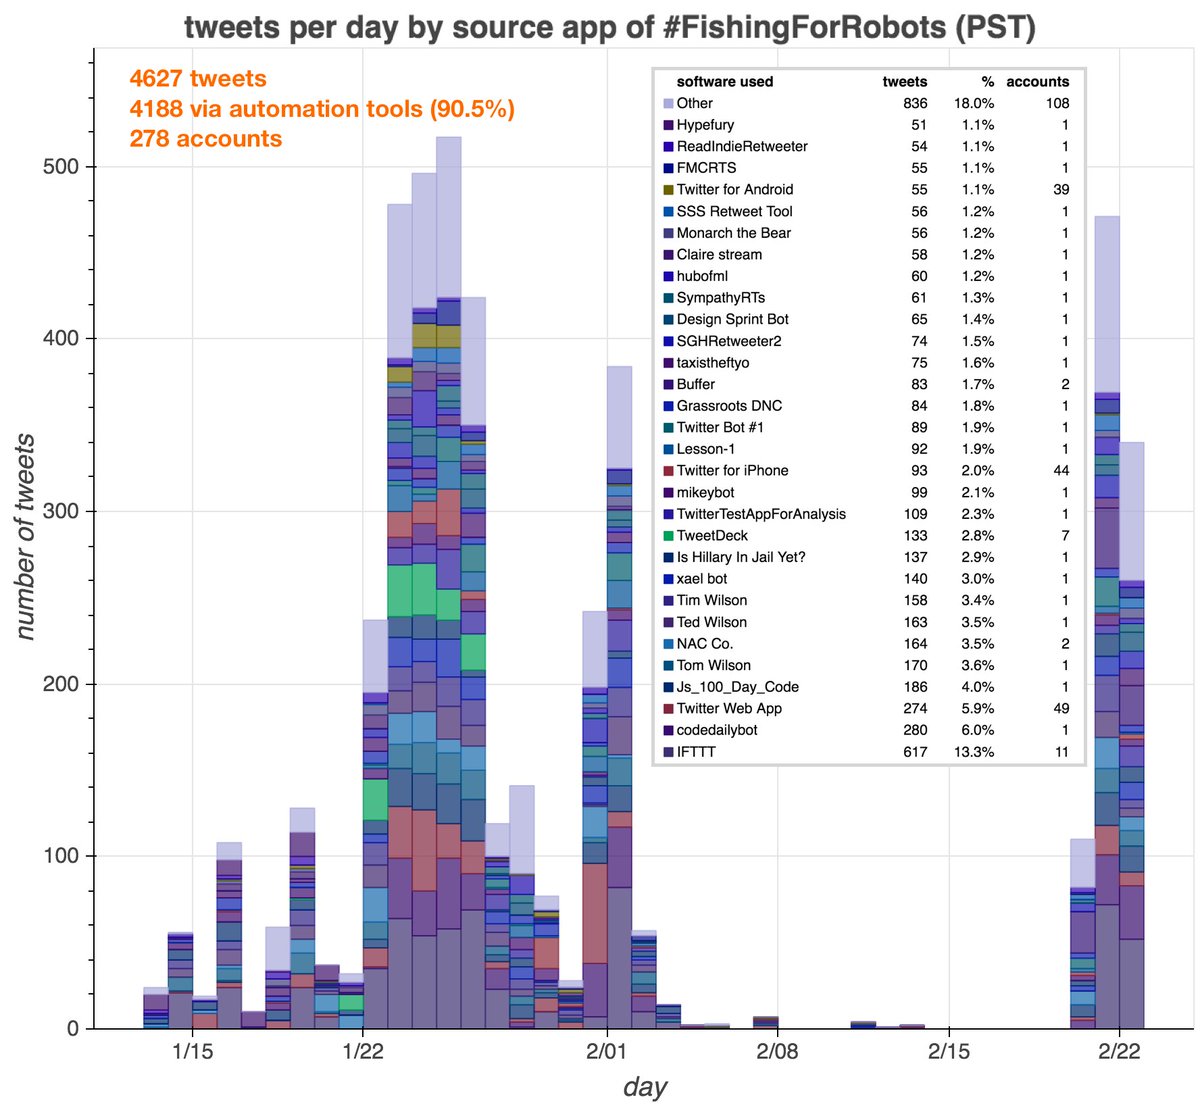 For the last two days,  @DrunkAlexJones has been  #FishingForRobots using a combination of Buffer (for scheduled tweets) and IFTTT (for cloned tweets, some of which got recursive.) He triggered 840 additional  #FishingForRobots tweets from 77 accounts, most of it automated traffic.